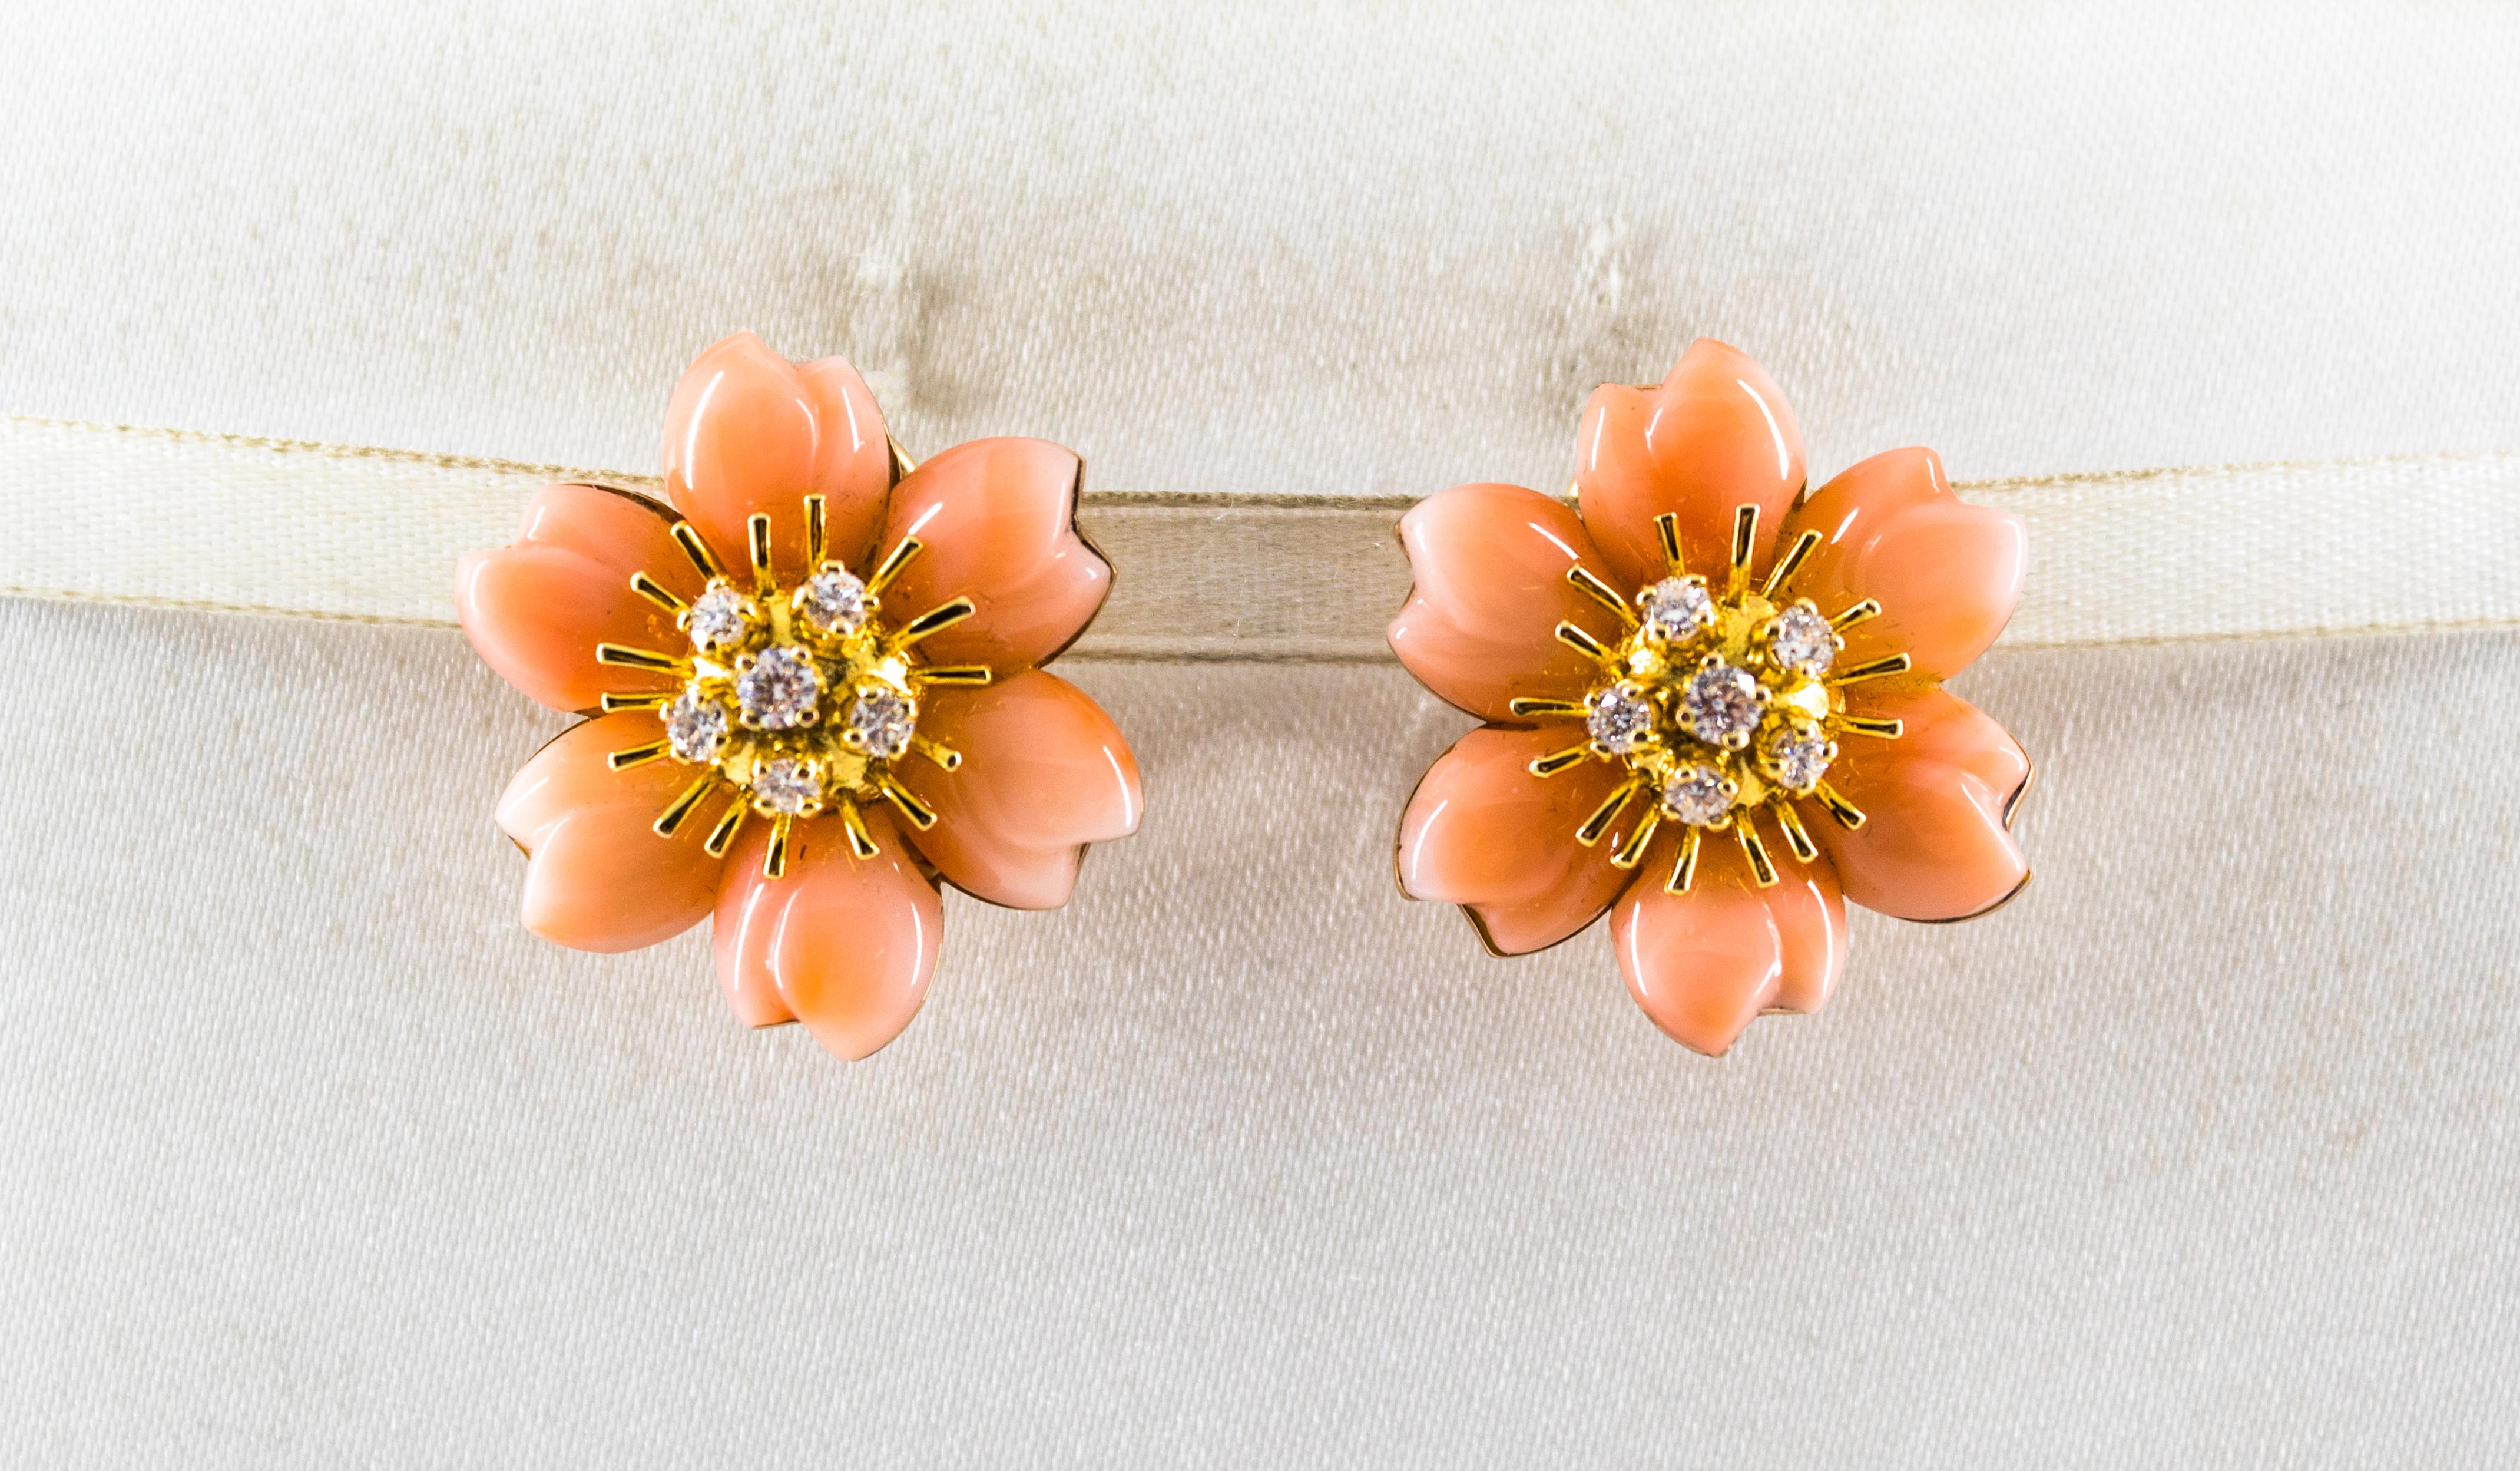 These Earrings are made of 14K Yellow Gold.
These Earrings have 0.65 Carats of White Diamonds.
These Earrings have Pink Coral.
These Earrings are available also in White Coral, Mediterranean Red Coral, Turquoise or Lapis Lazuli.
These Earrings are